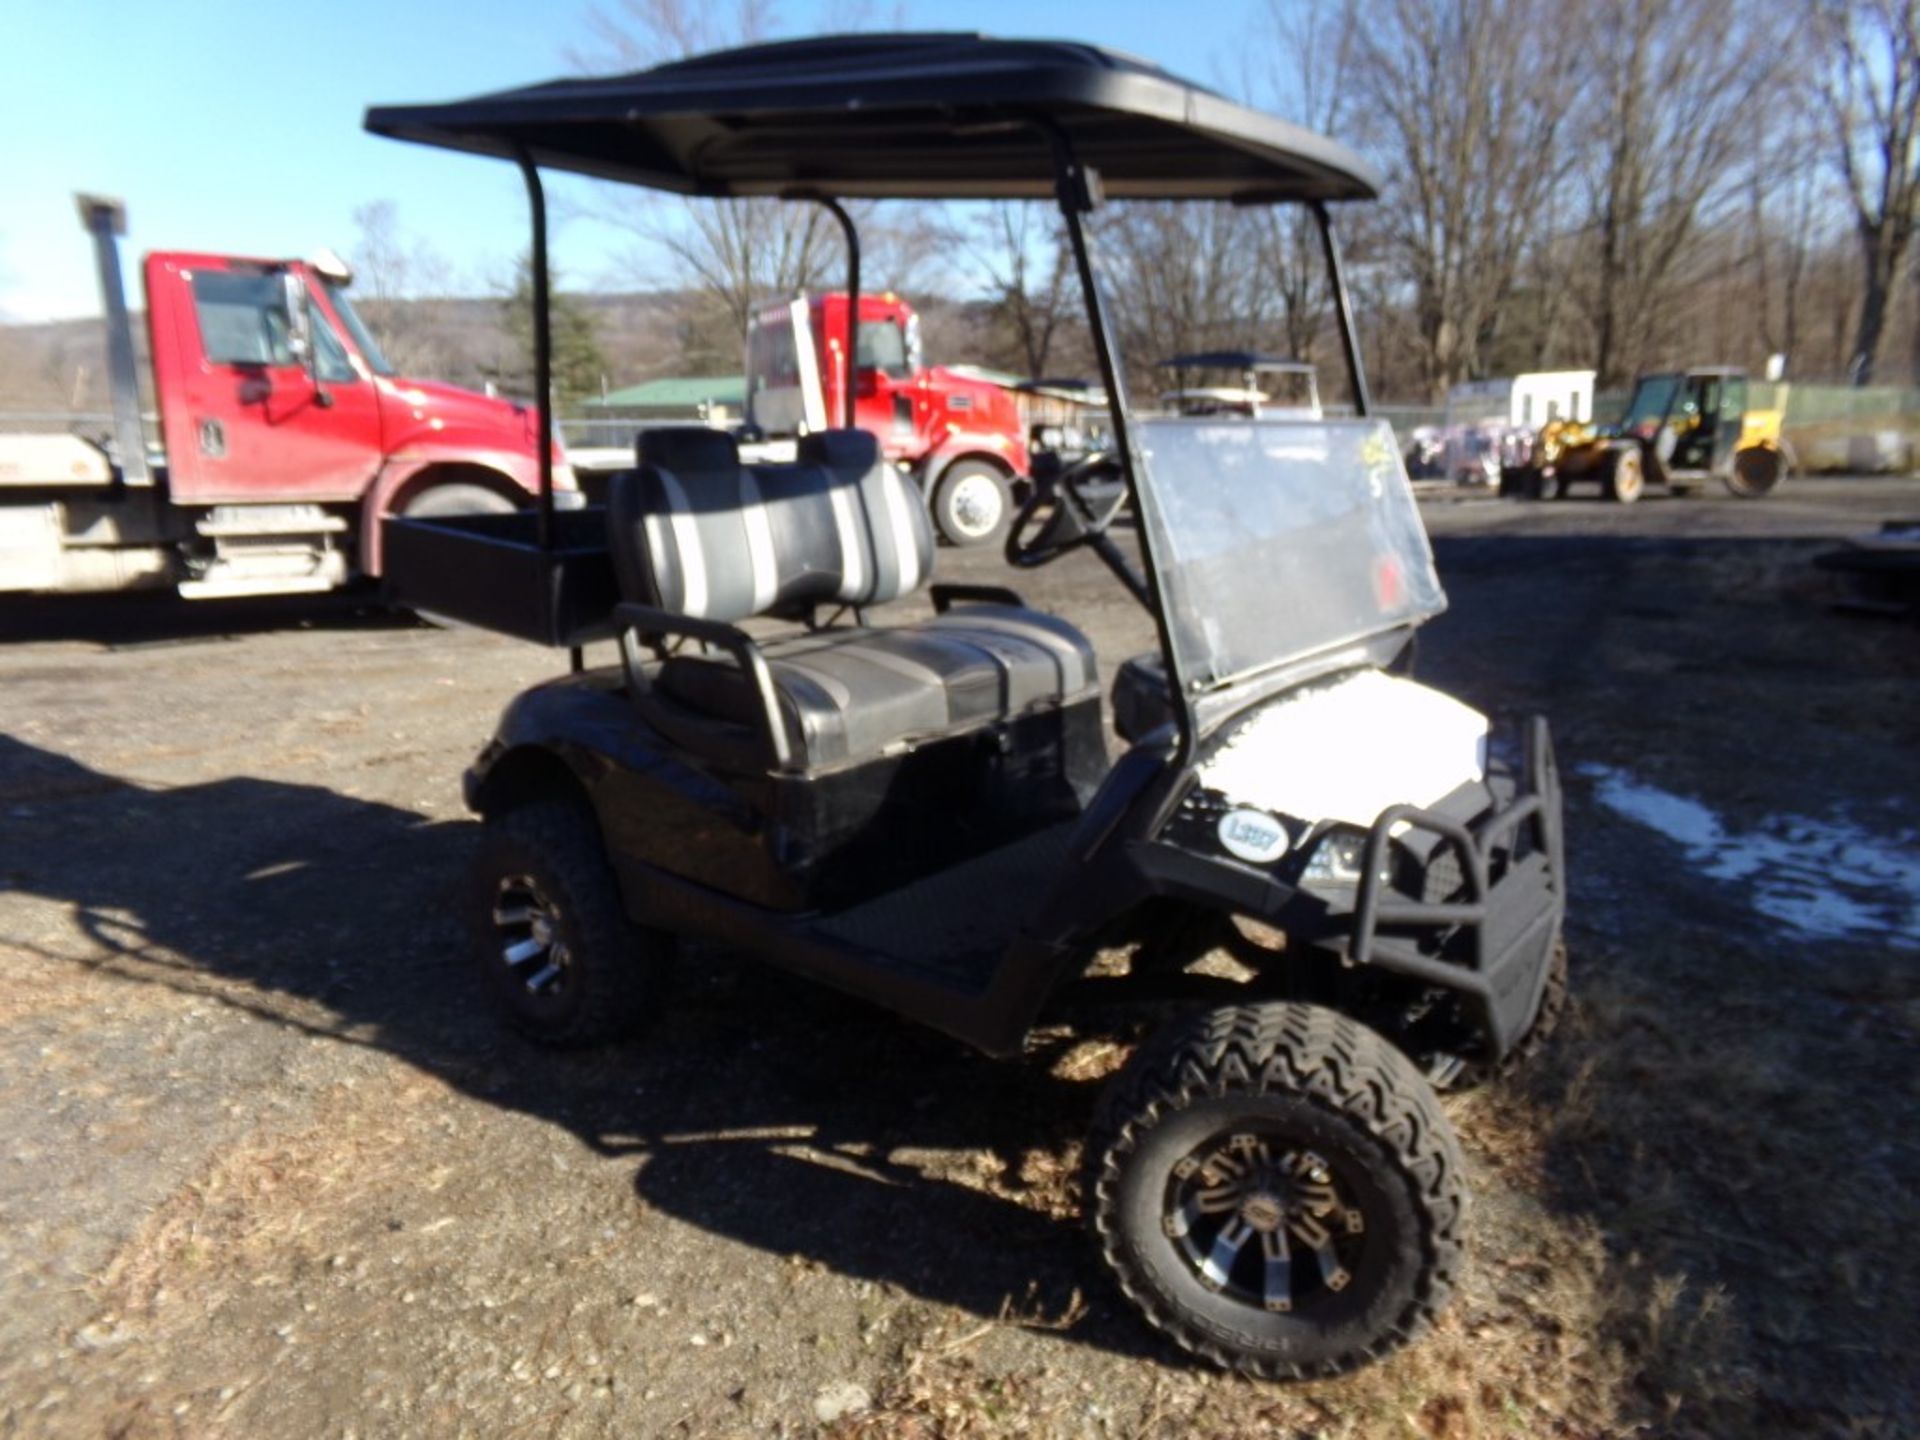 Black Lifted Yamaha Gas Golf Cart with Canopy, Windshield, Steel Utility Box, Cart # L137 - Image 2 of 3